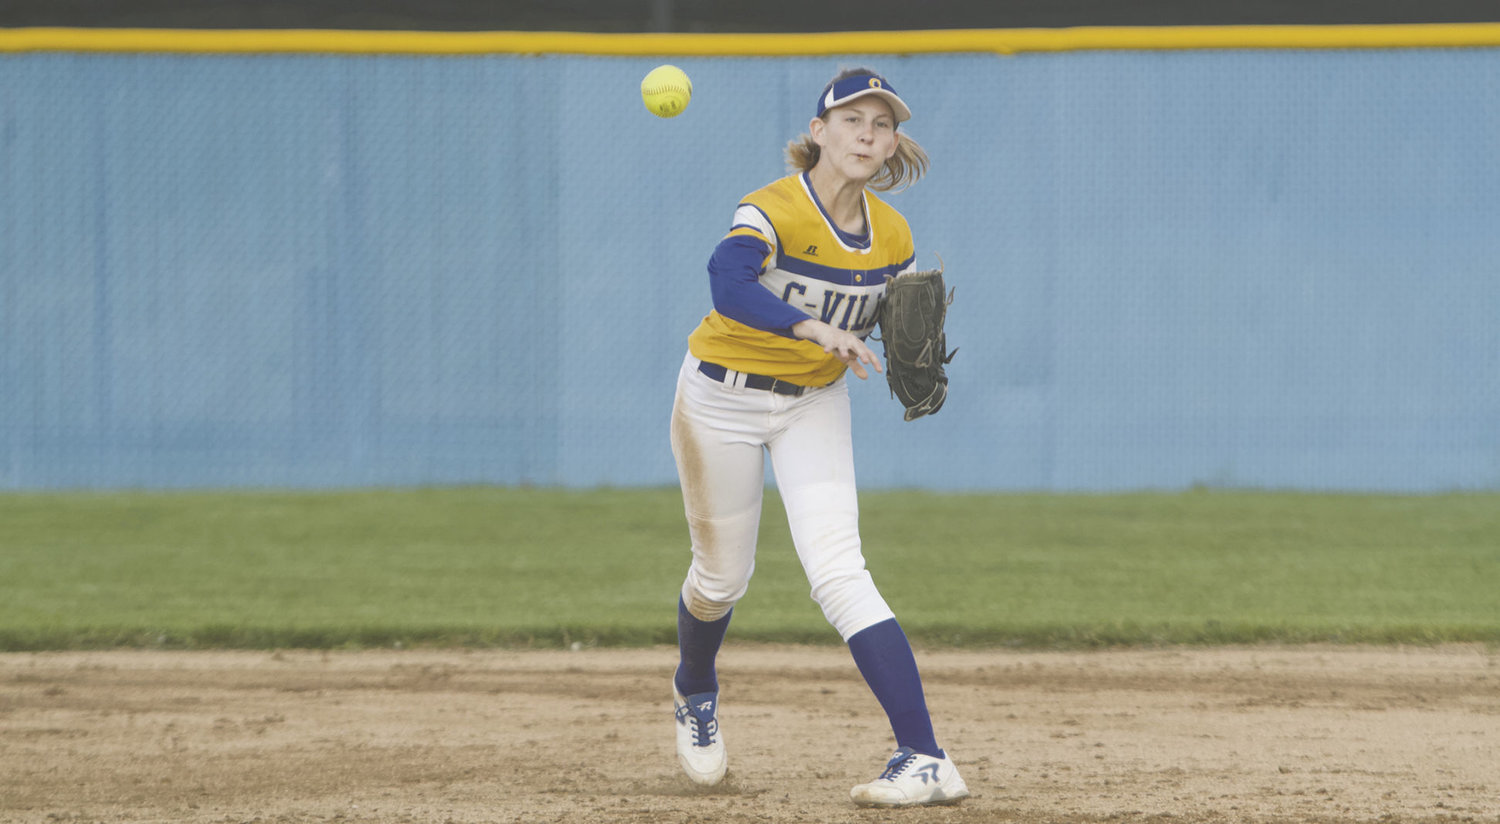 Crawfordsville's Addie Laskowski earned 12 varsity letters over four years as an Athenian.